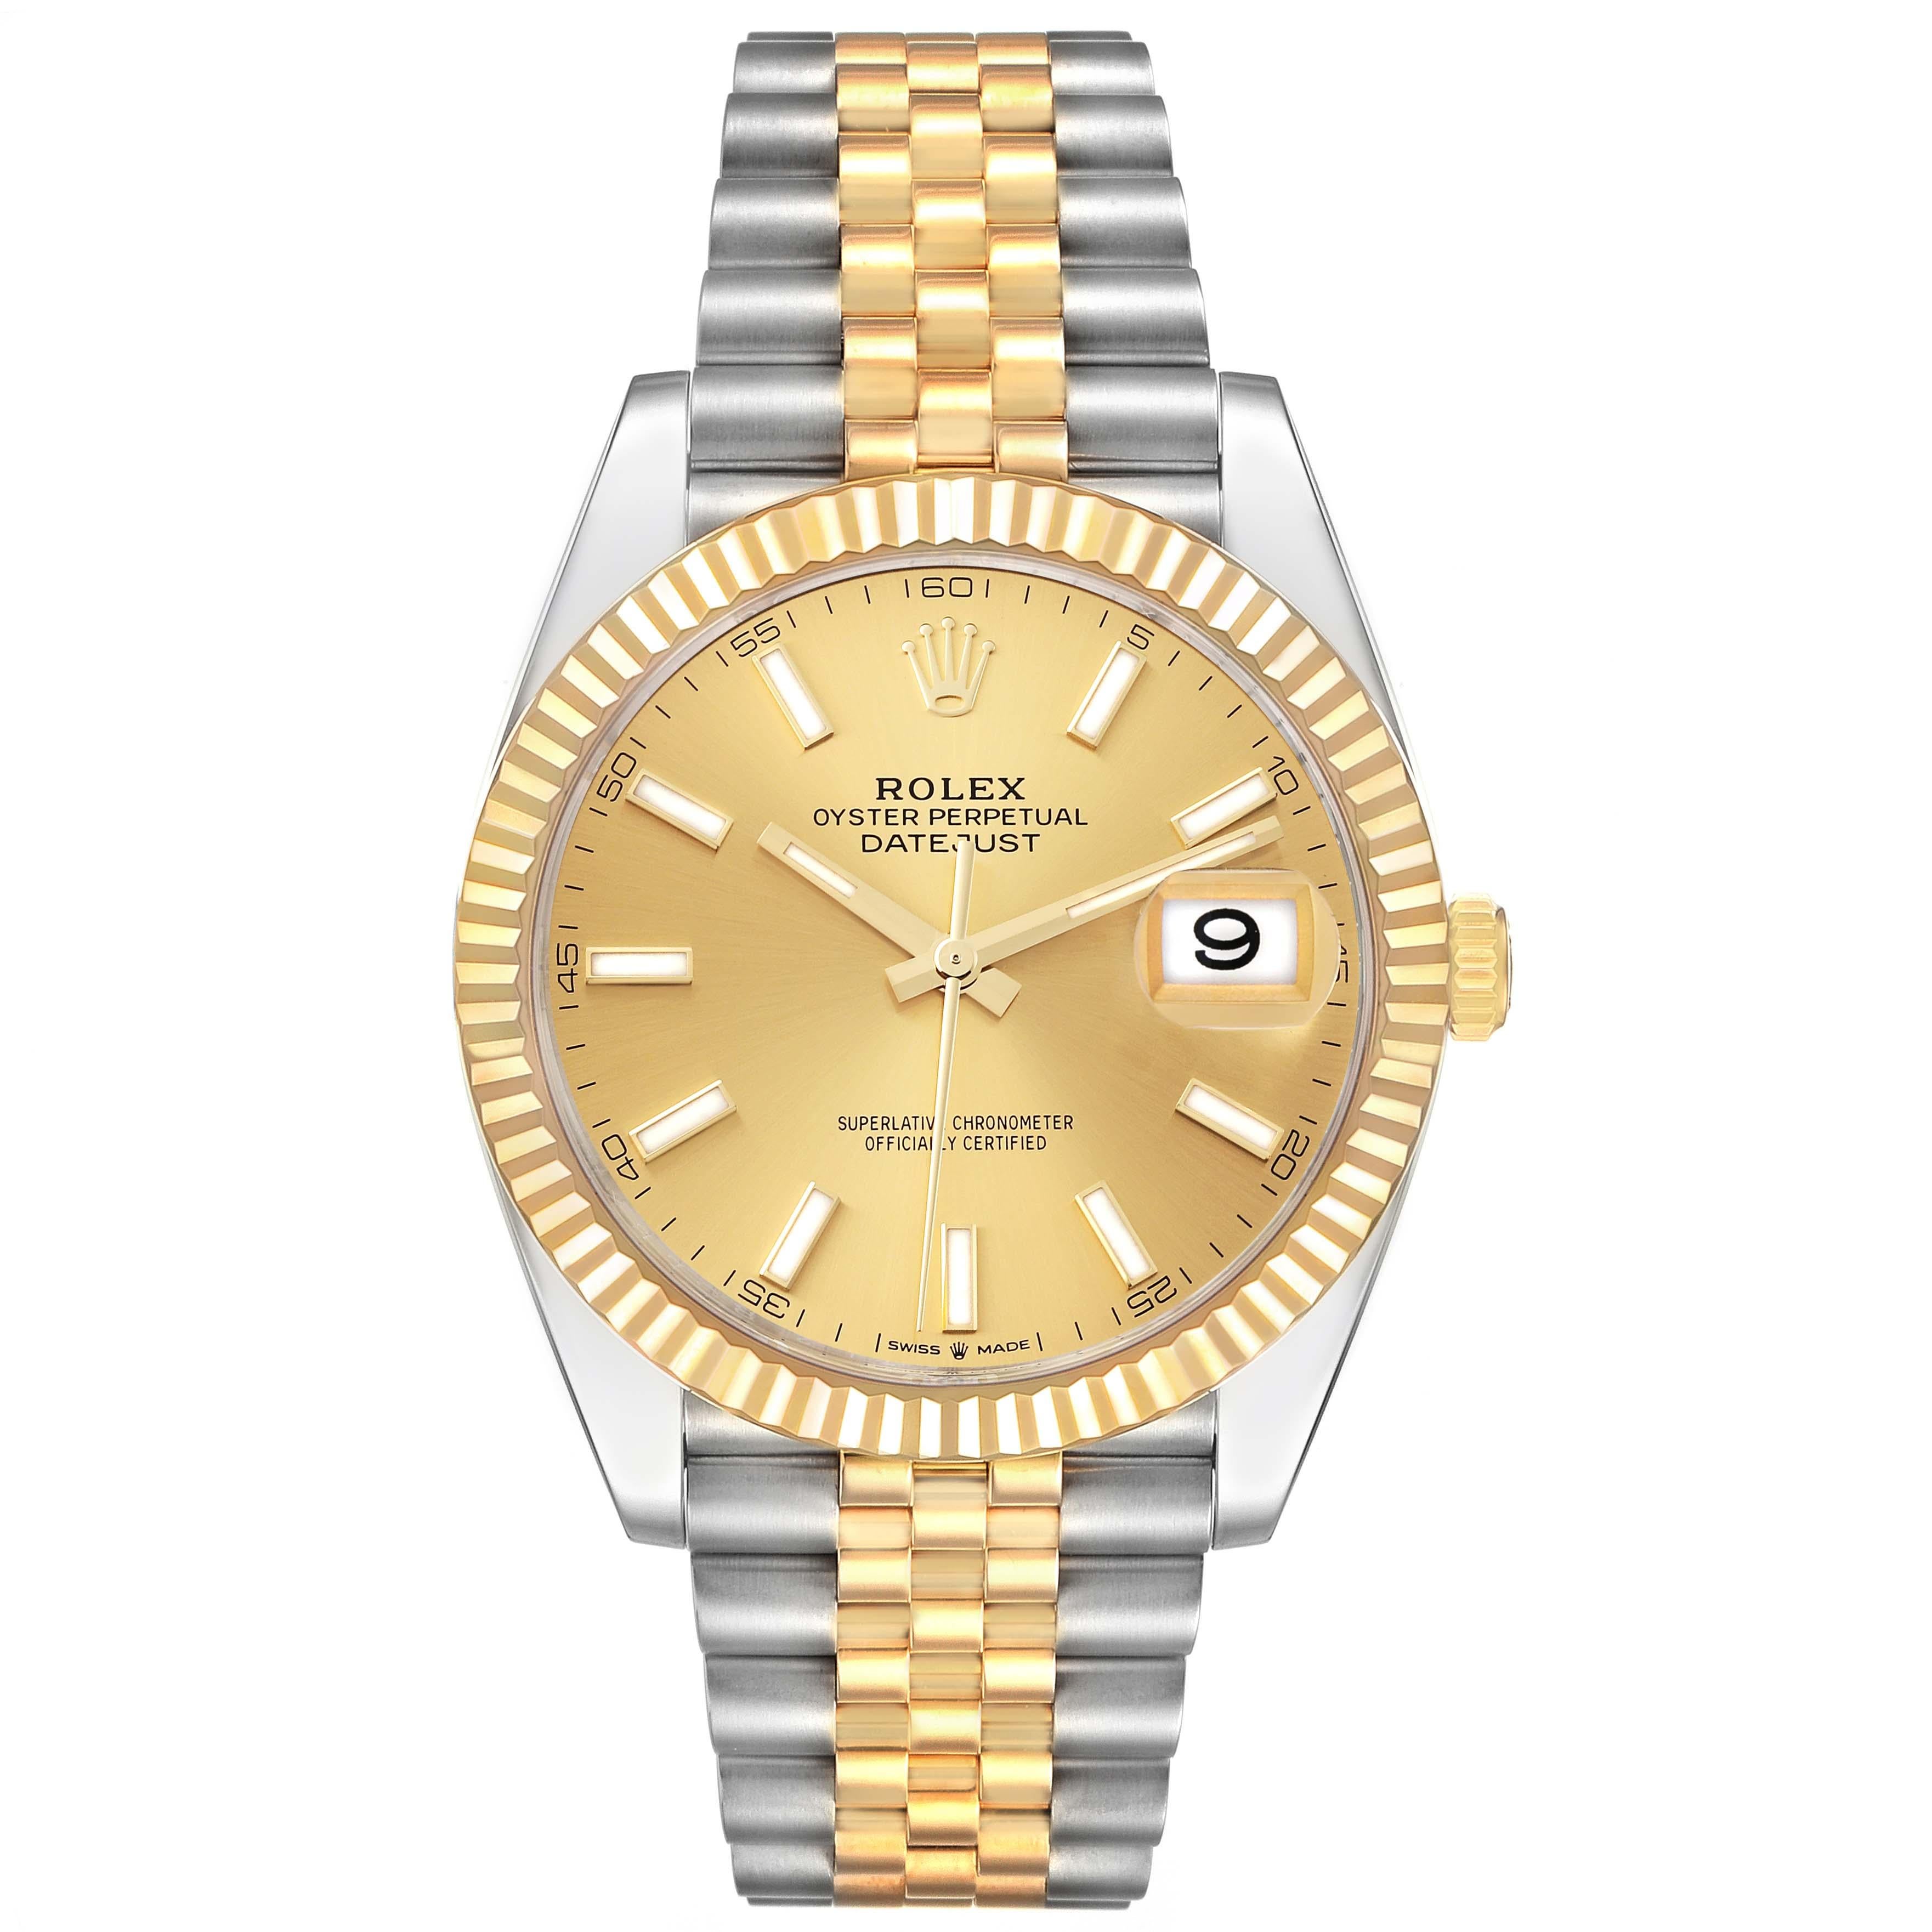 Rolex Datejust 41 Steel Yellow Gold Champagne Dial Mens Watch 126333 Box Card. Officially certified chronometer automatic self-winding movement with quickset date. Stainless steel and 18K yellow gold case 41 mm in diameter. High polished lugs. Rolex